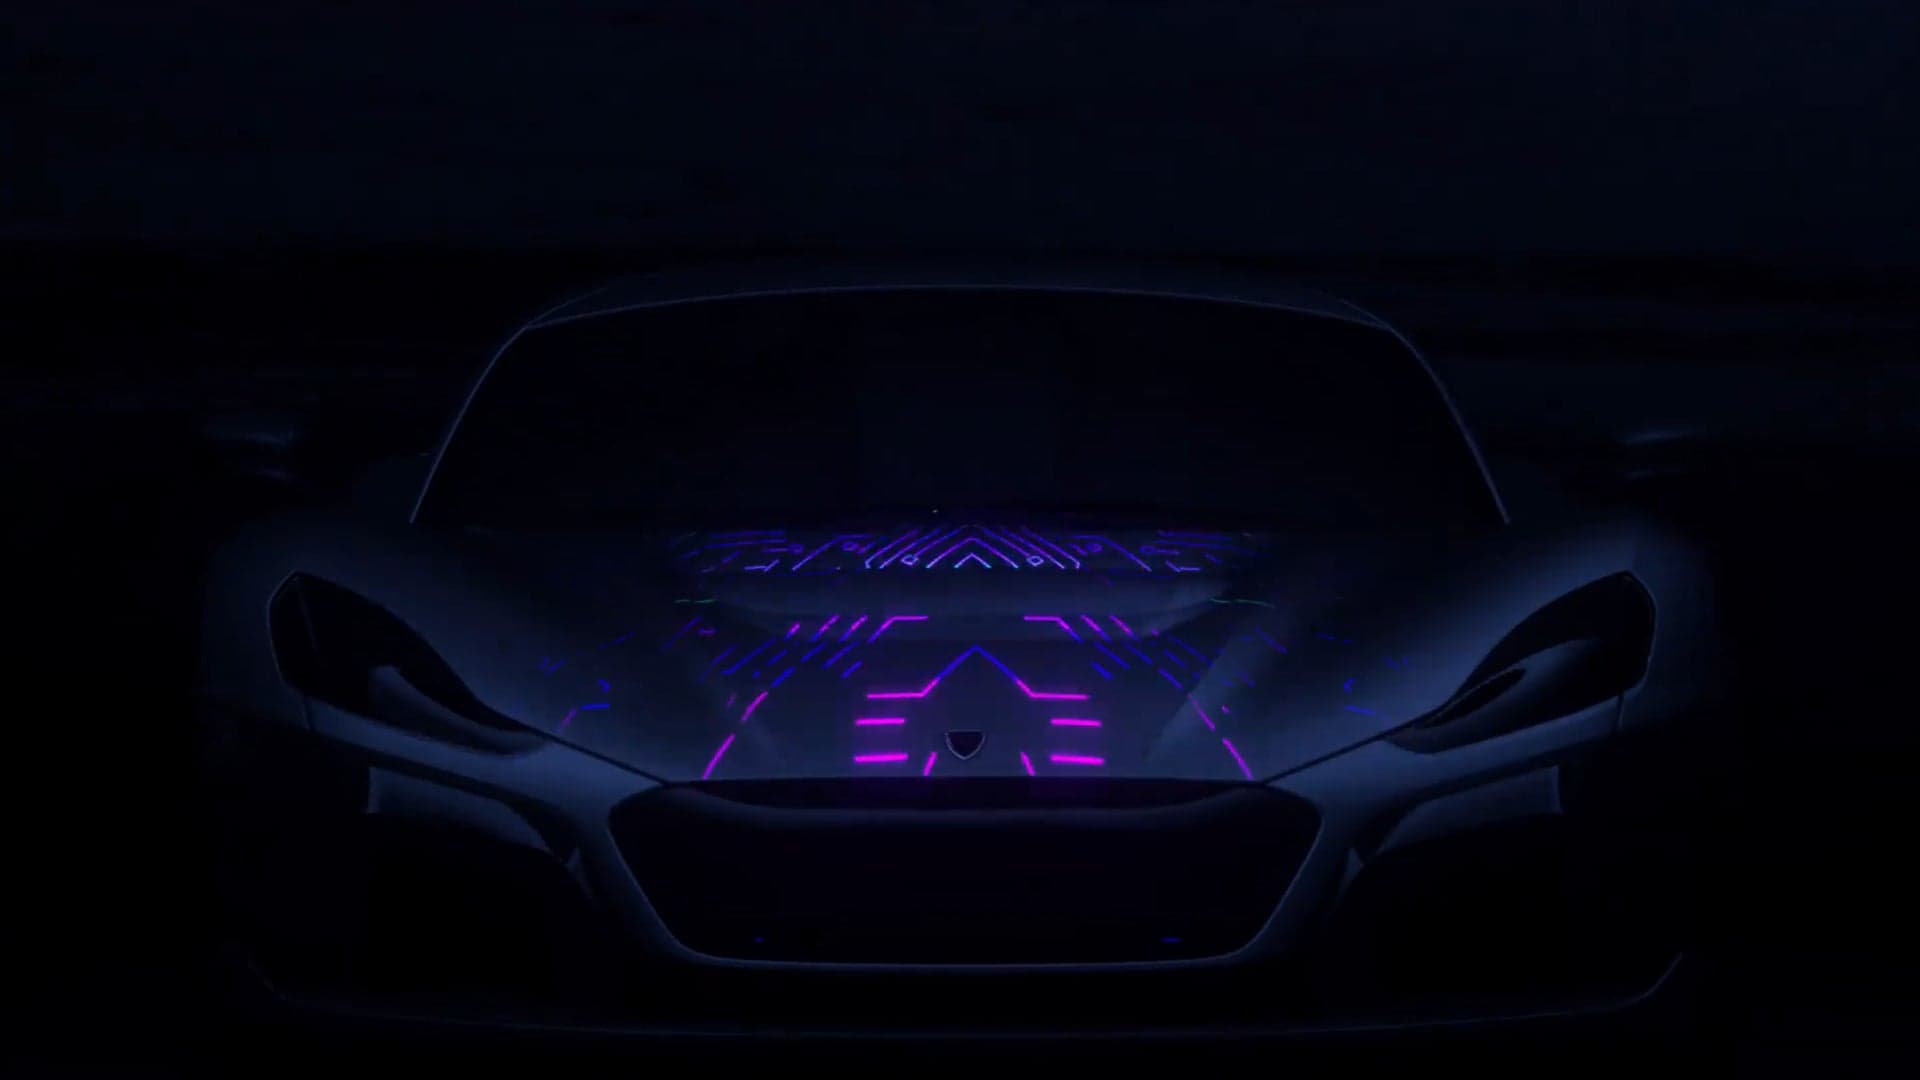 Rimac’s New Hypercar Could Have 120 kWh Battery, Level 4 Autonomy